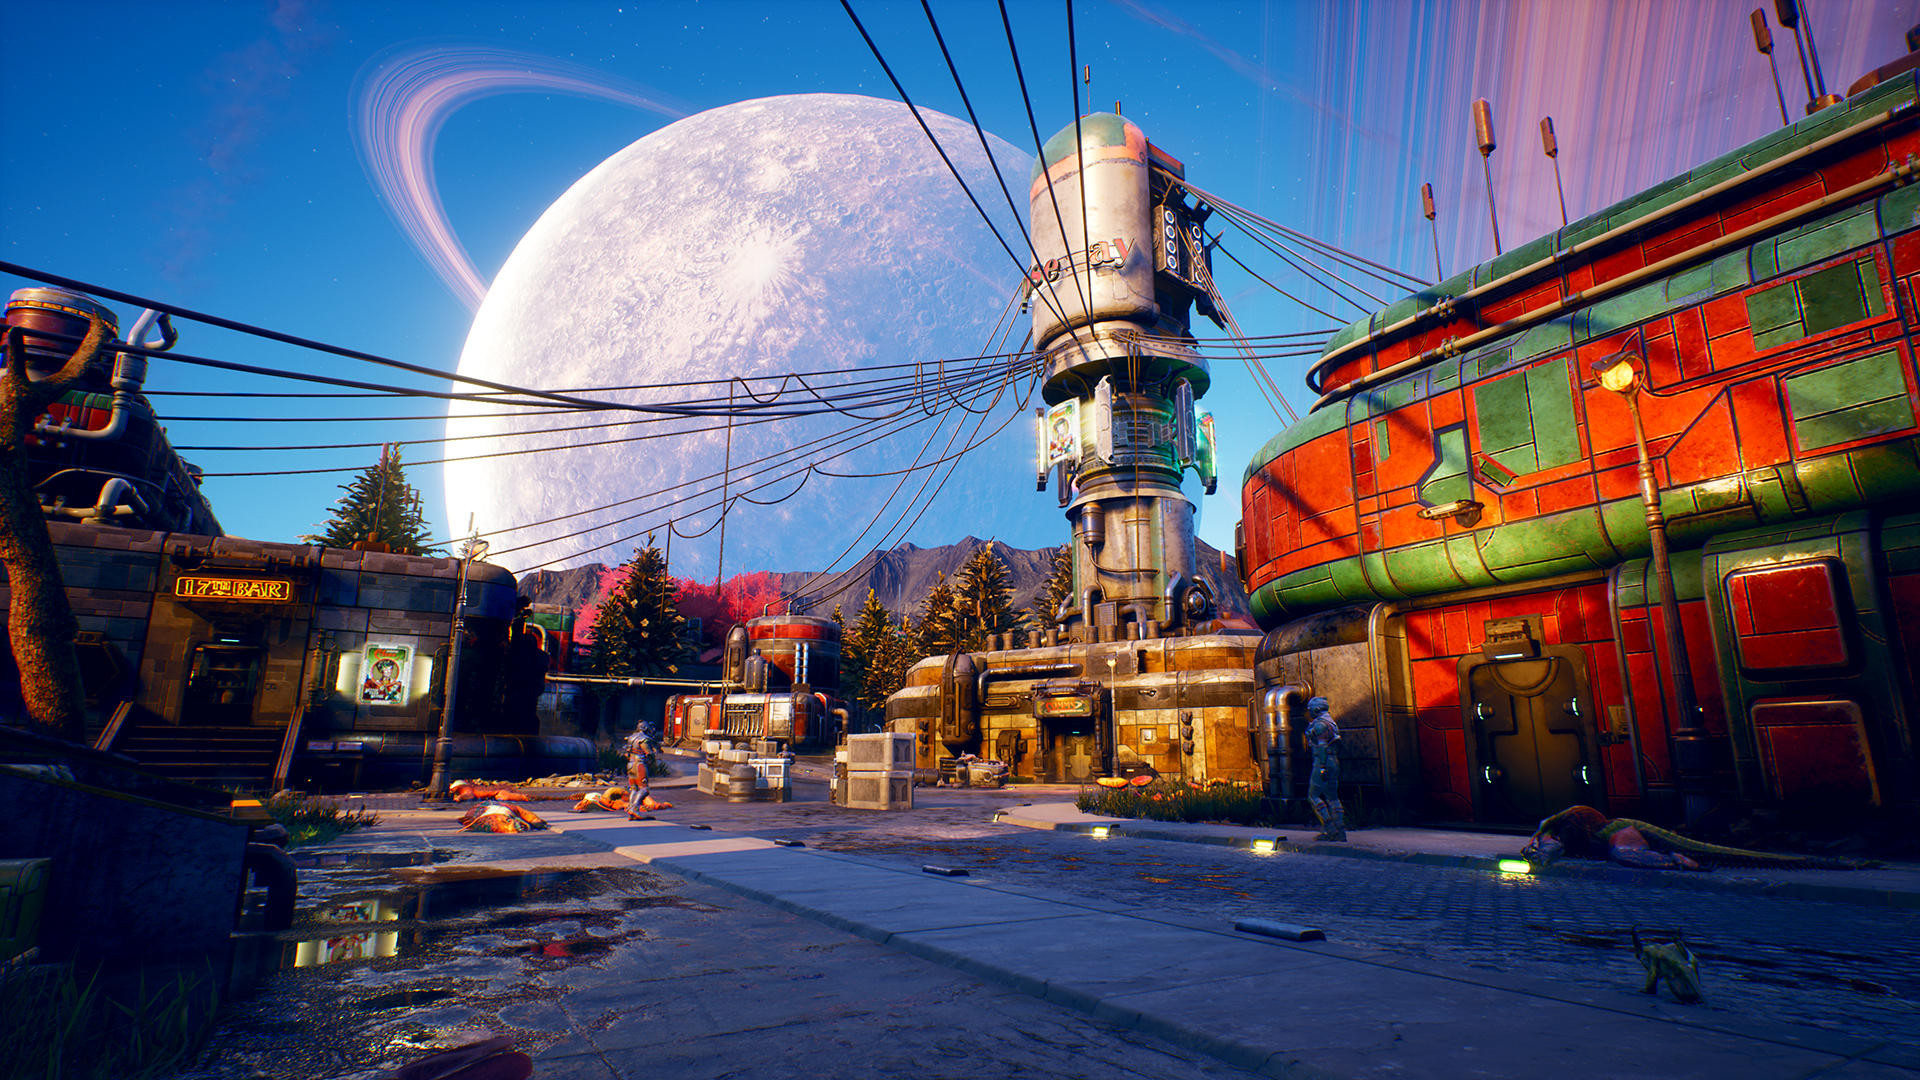 The Outer Worlds scores our roundup of the critics